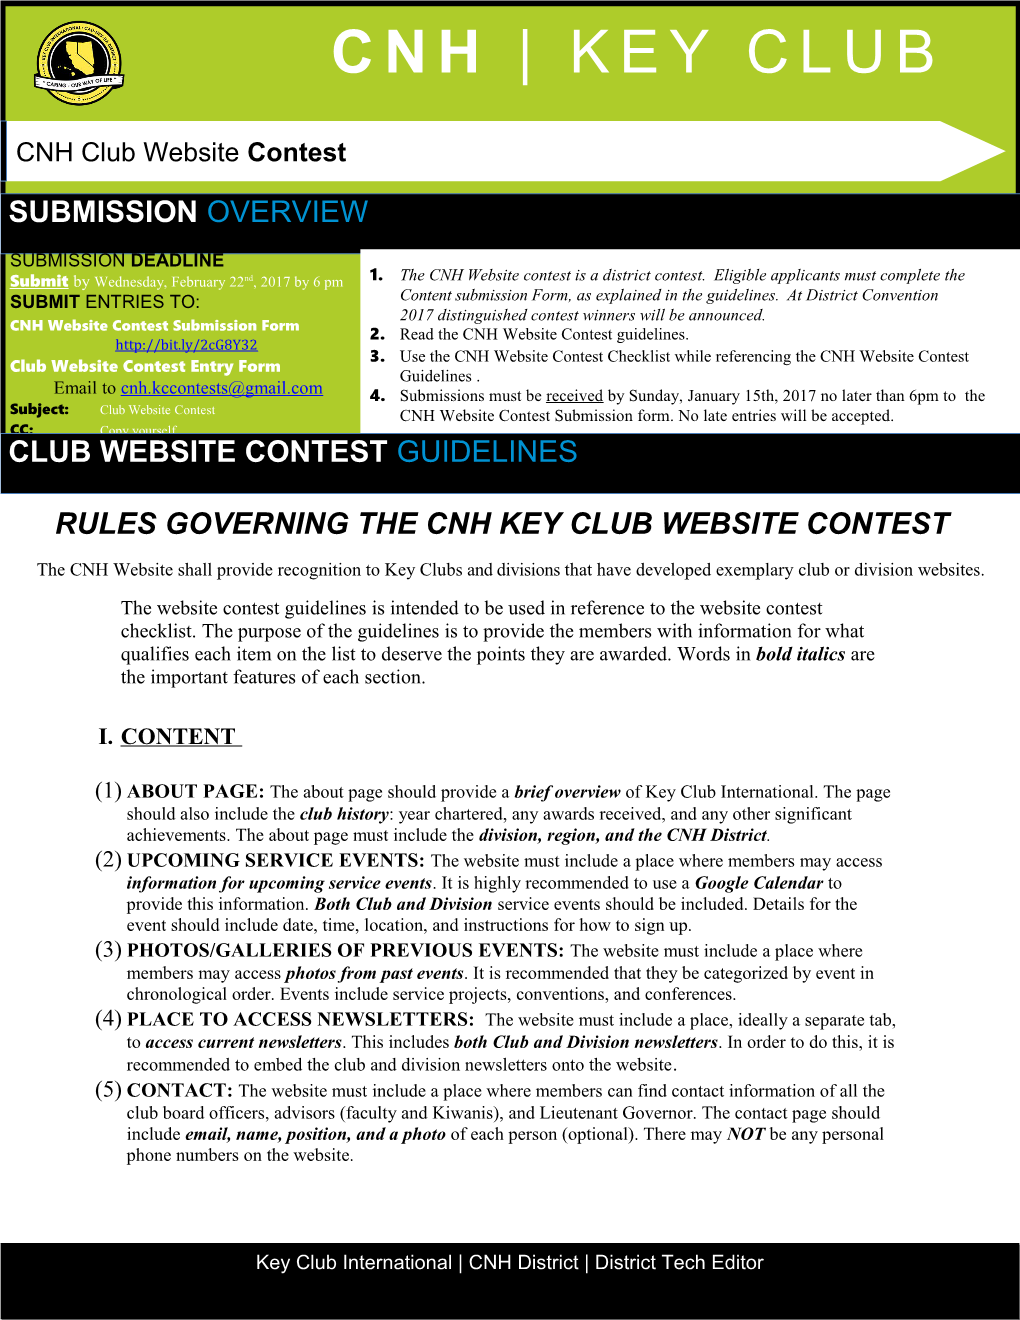 The Website Contest Guidelines Is Intended to Be Used in Reference to the Website Contest